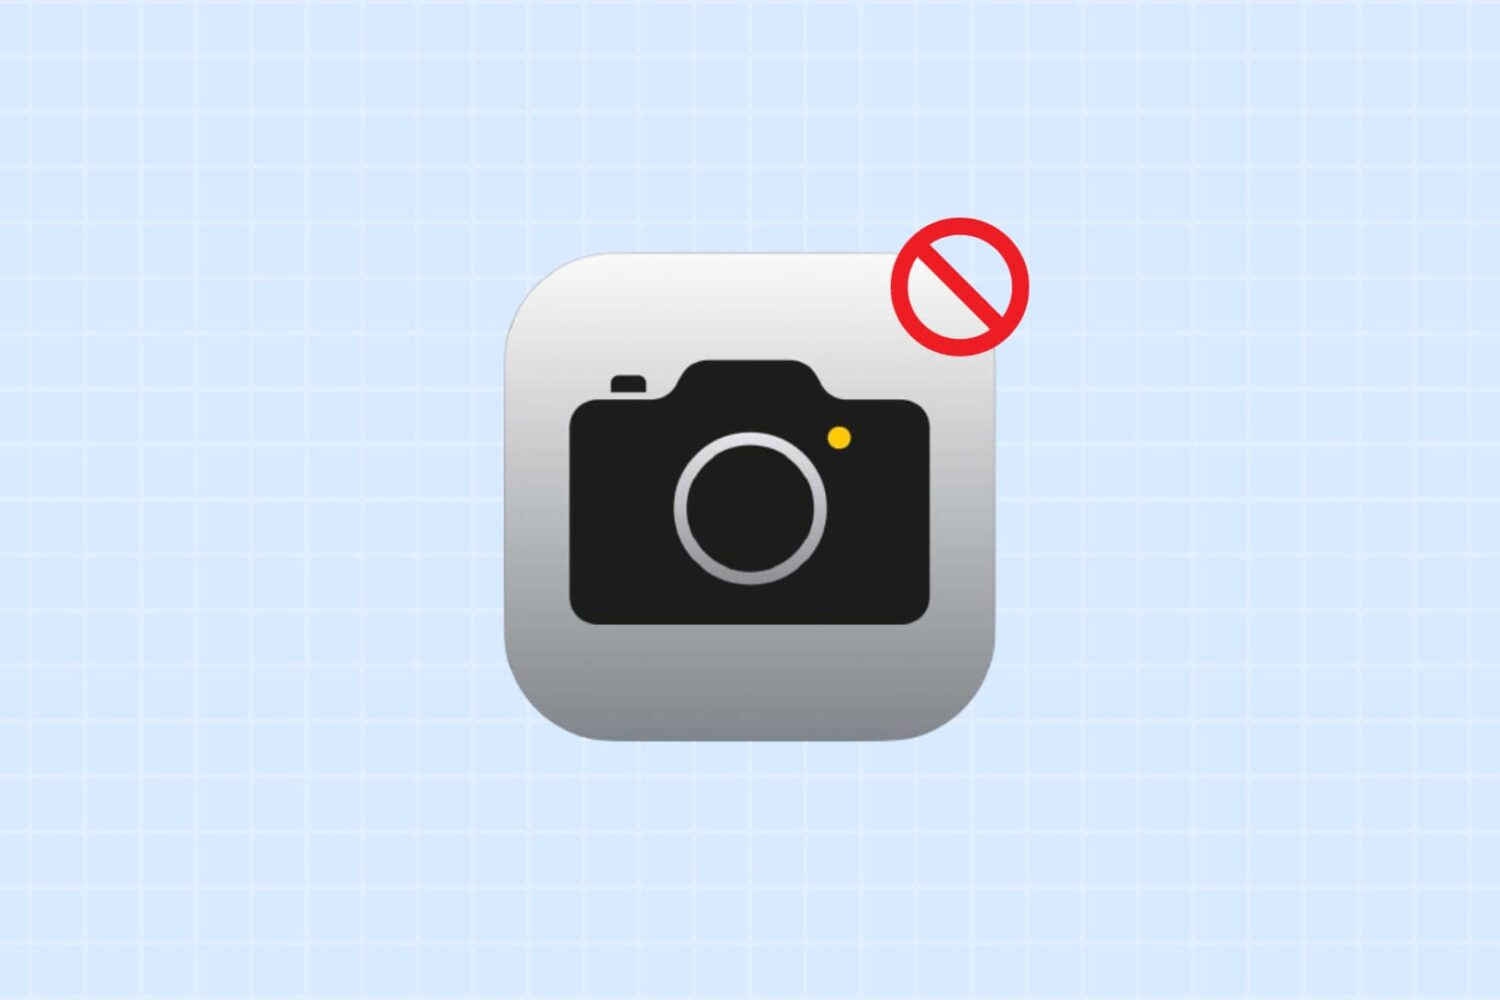 iPhone Camera icon with red block sign